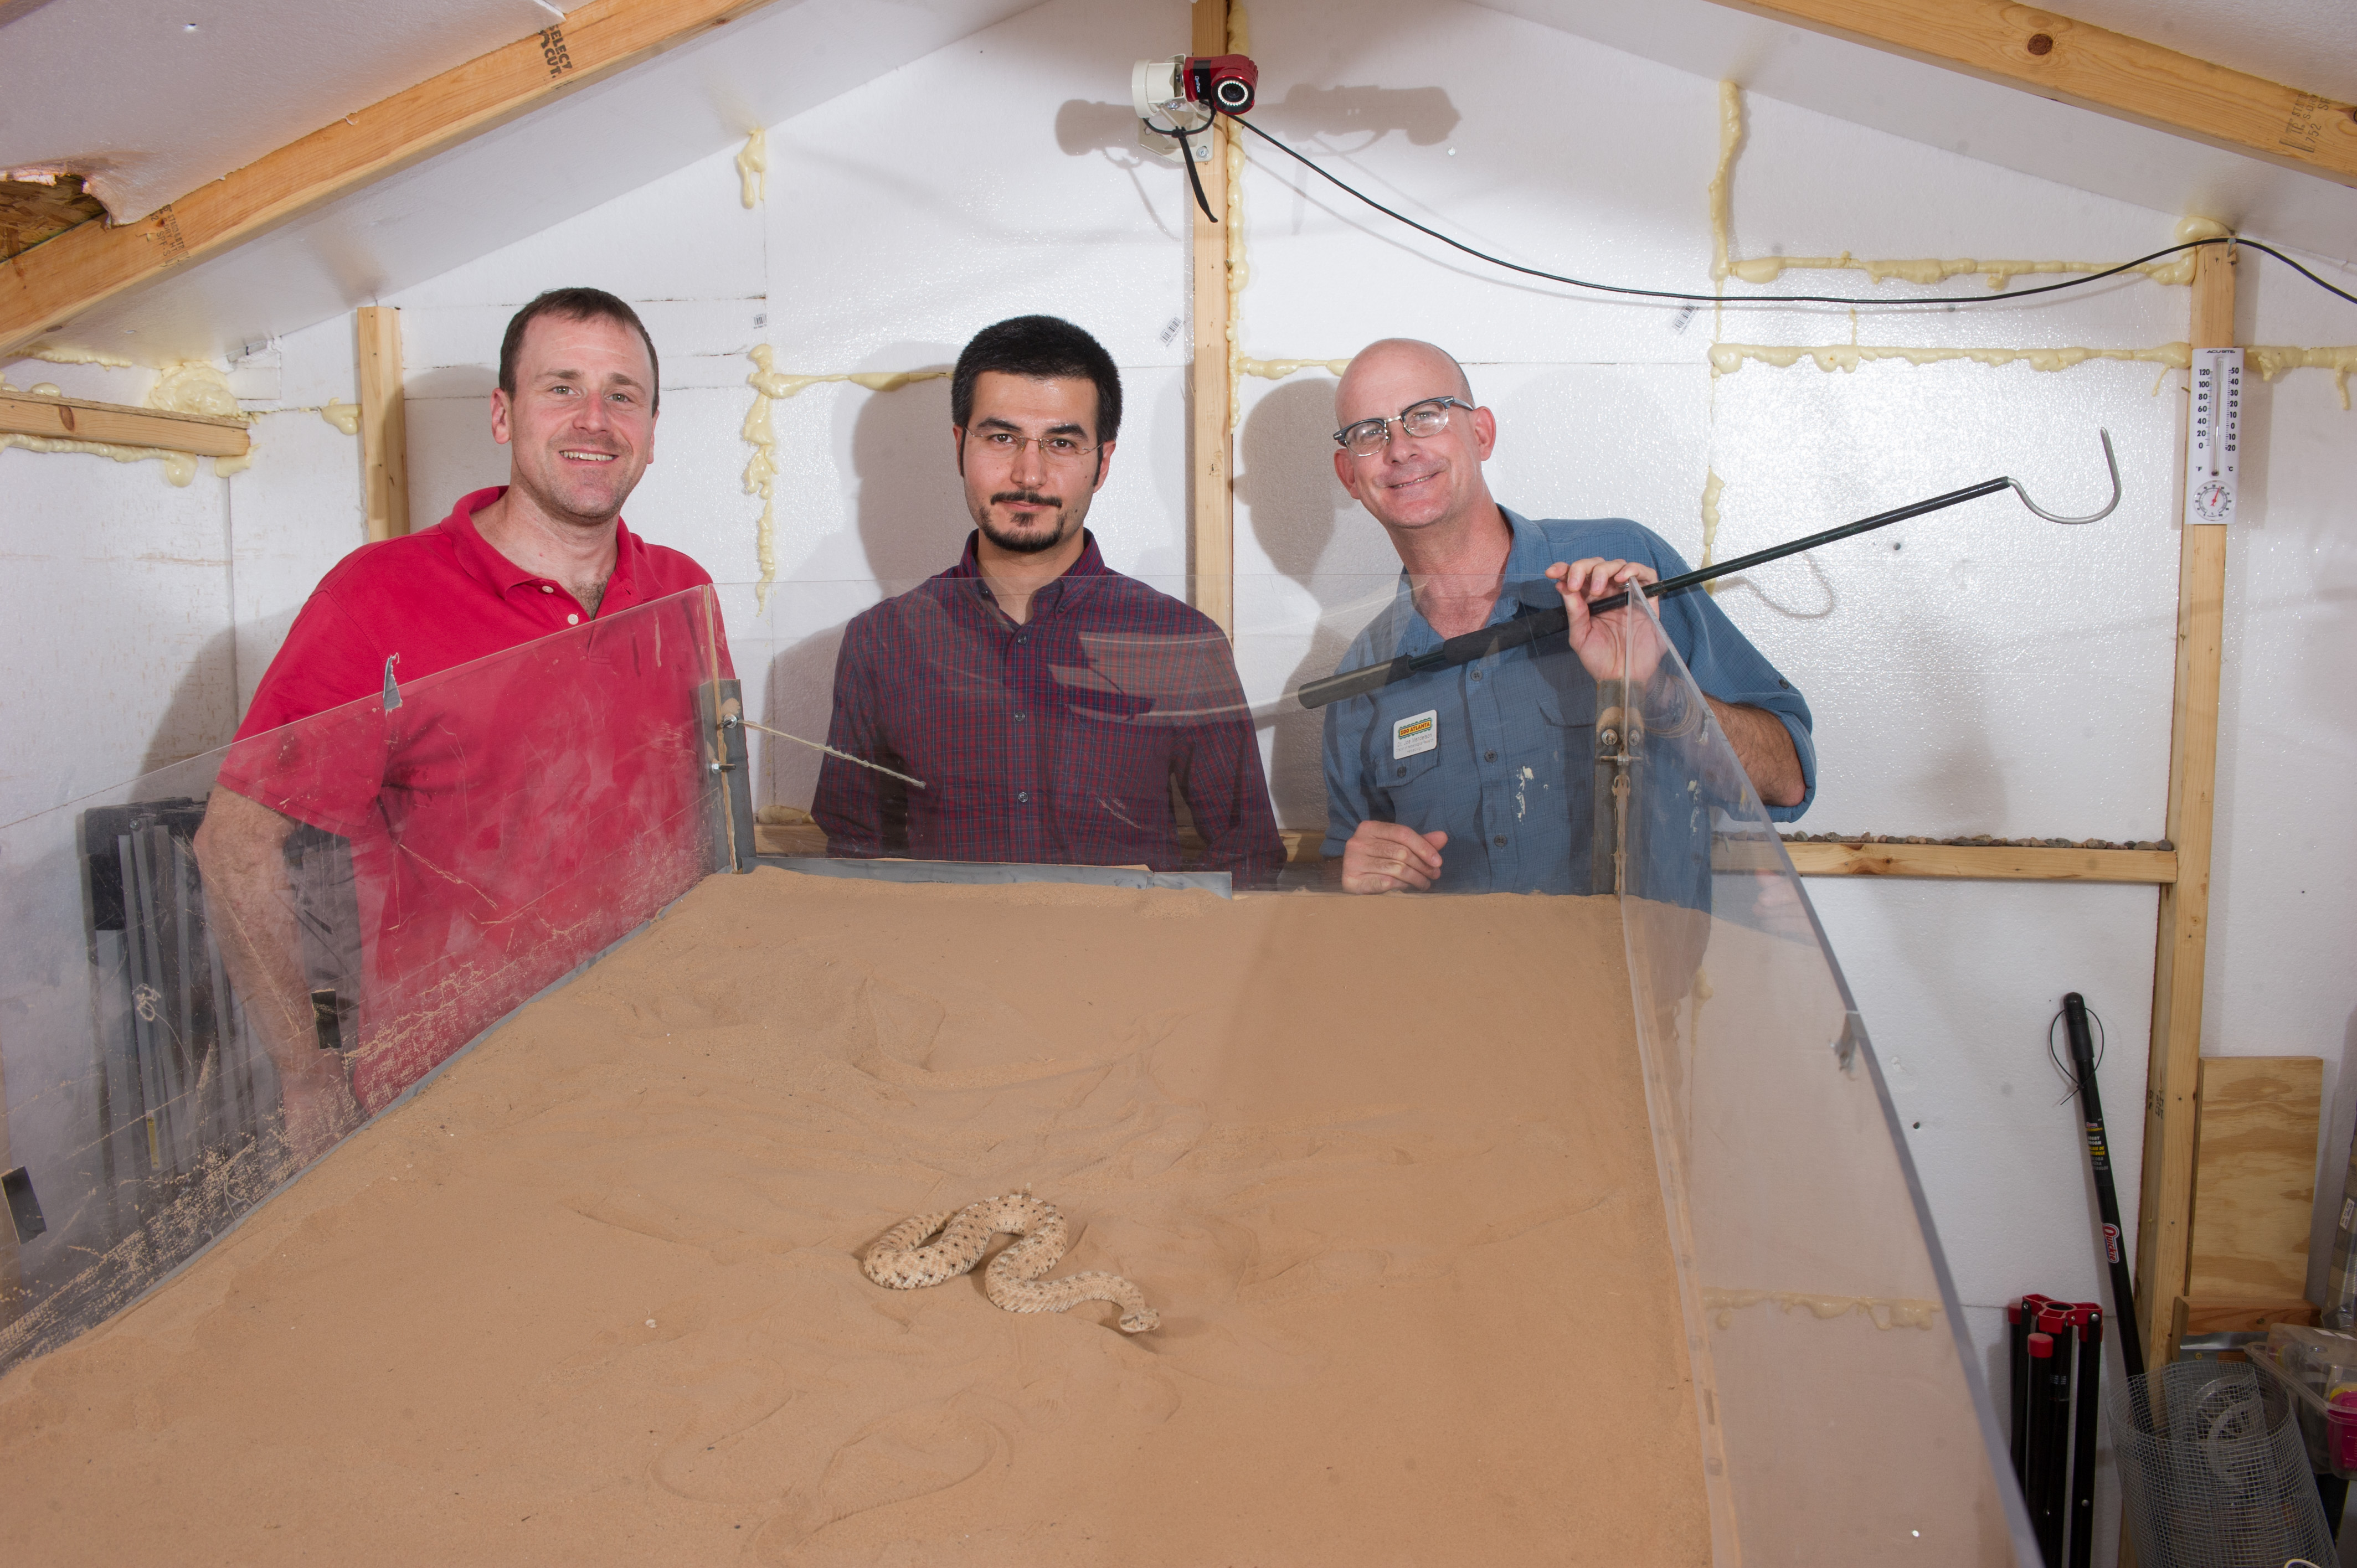 Researchers studied sidewinder snakes to understand the unique motion they use to climb sandy slopes. Shown (l-r) are Dan Goldman of Georgia Tech, Hamid Marvi of Carnegie Mellon and Joe Mendelson of Zoo Atlanta. (Credit: Rob Felt)